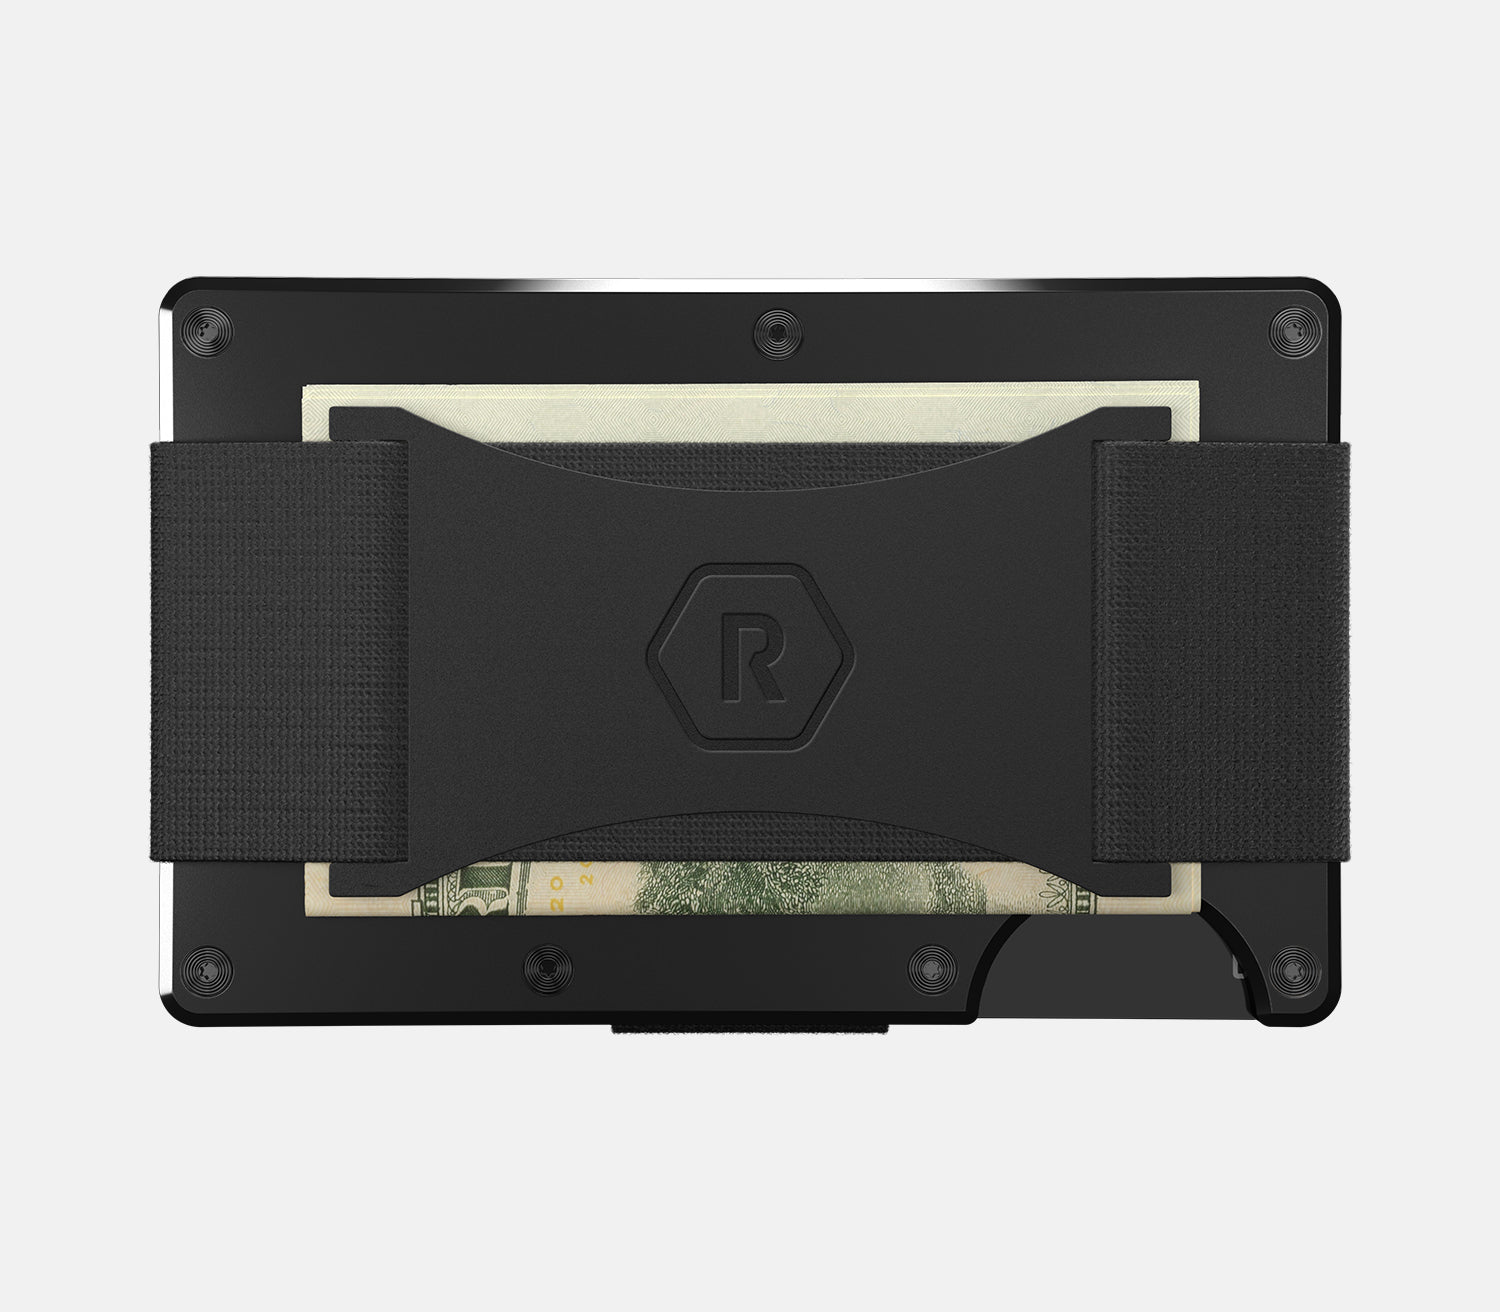 The 11 Best RFID Blocking Wallets to Keep Your Accounts Safe